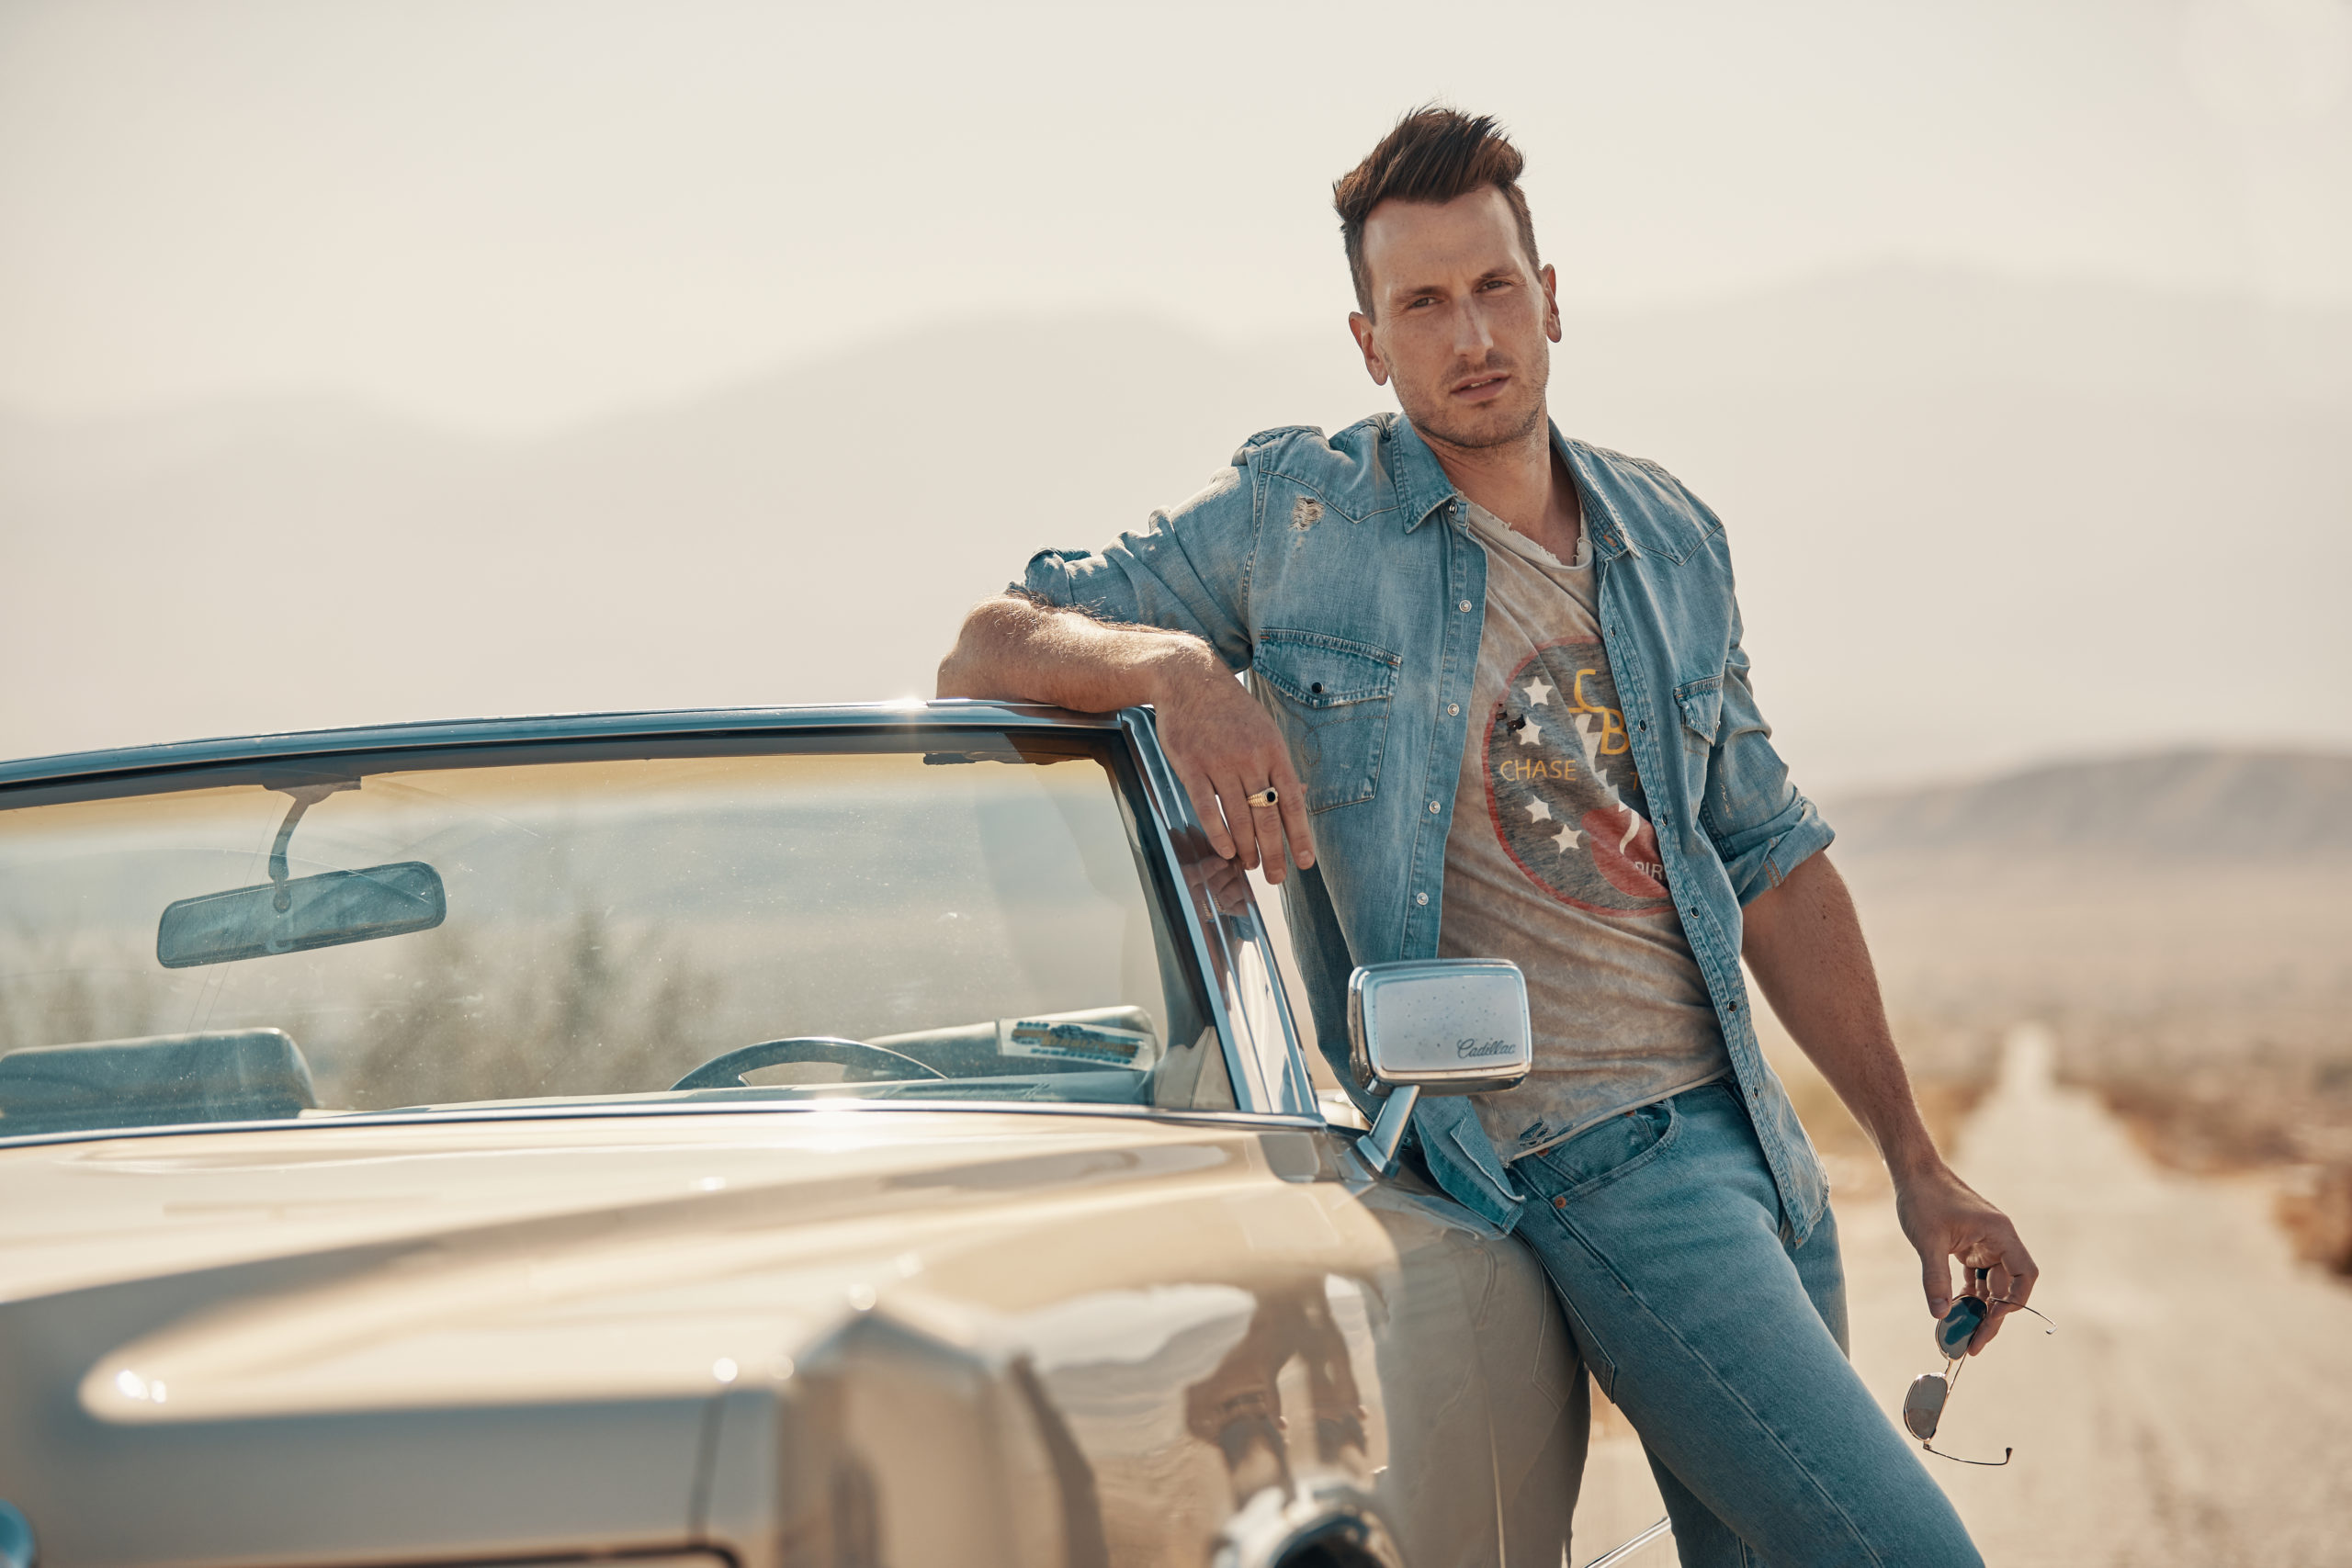 Russell Dickerson’s St. Jude’s Charity Efforts Provide Him With A New Meaning For His Single “Home Sweet” 